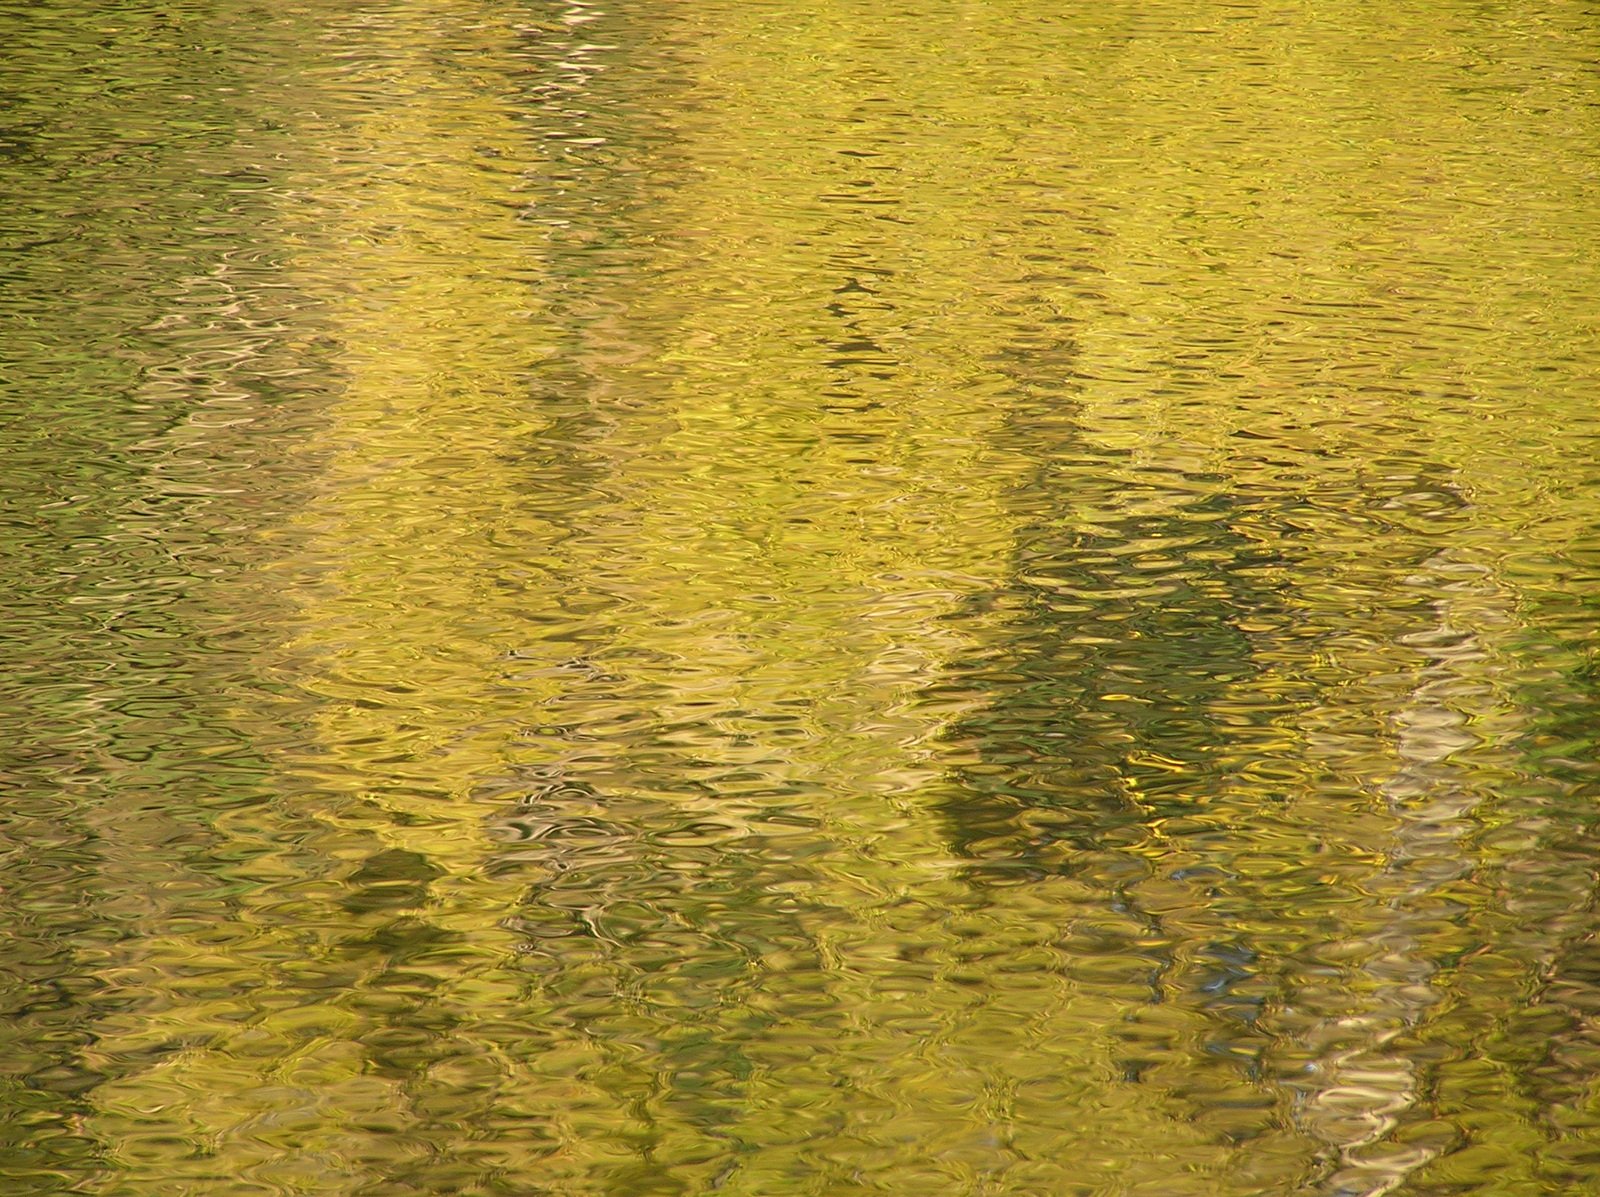 yellow colored trees reflected on the water in the sun